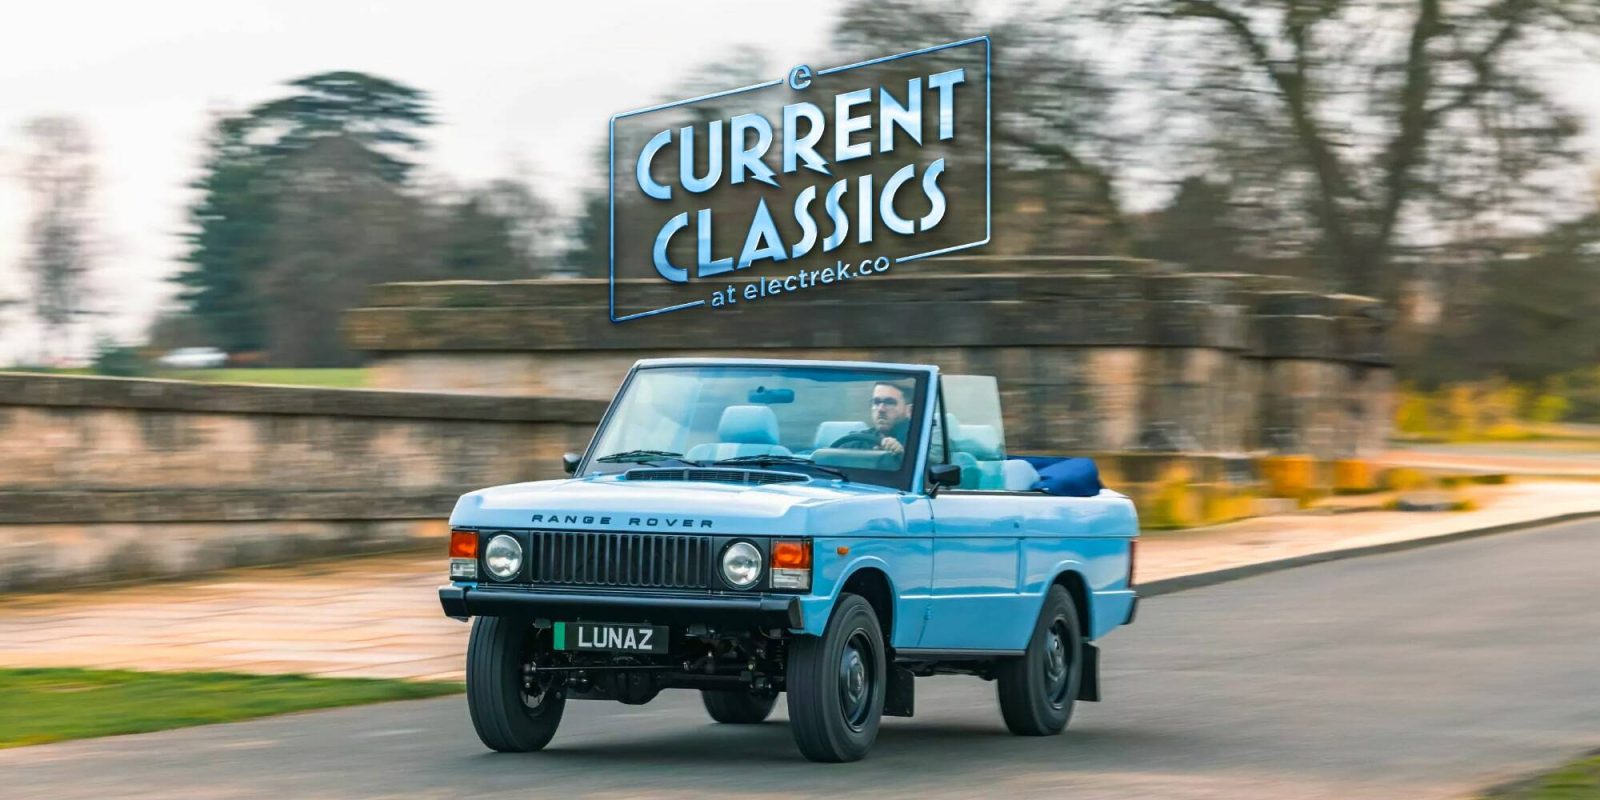 Lunaz’s 007-Inspired Classic Range Rover Safari Has A License To Electrify